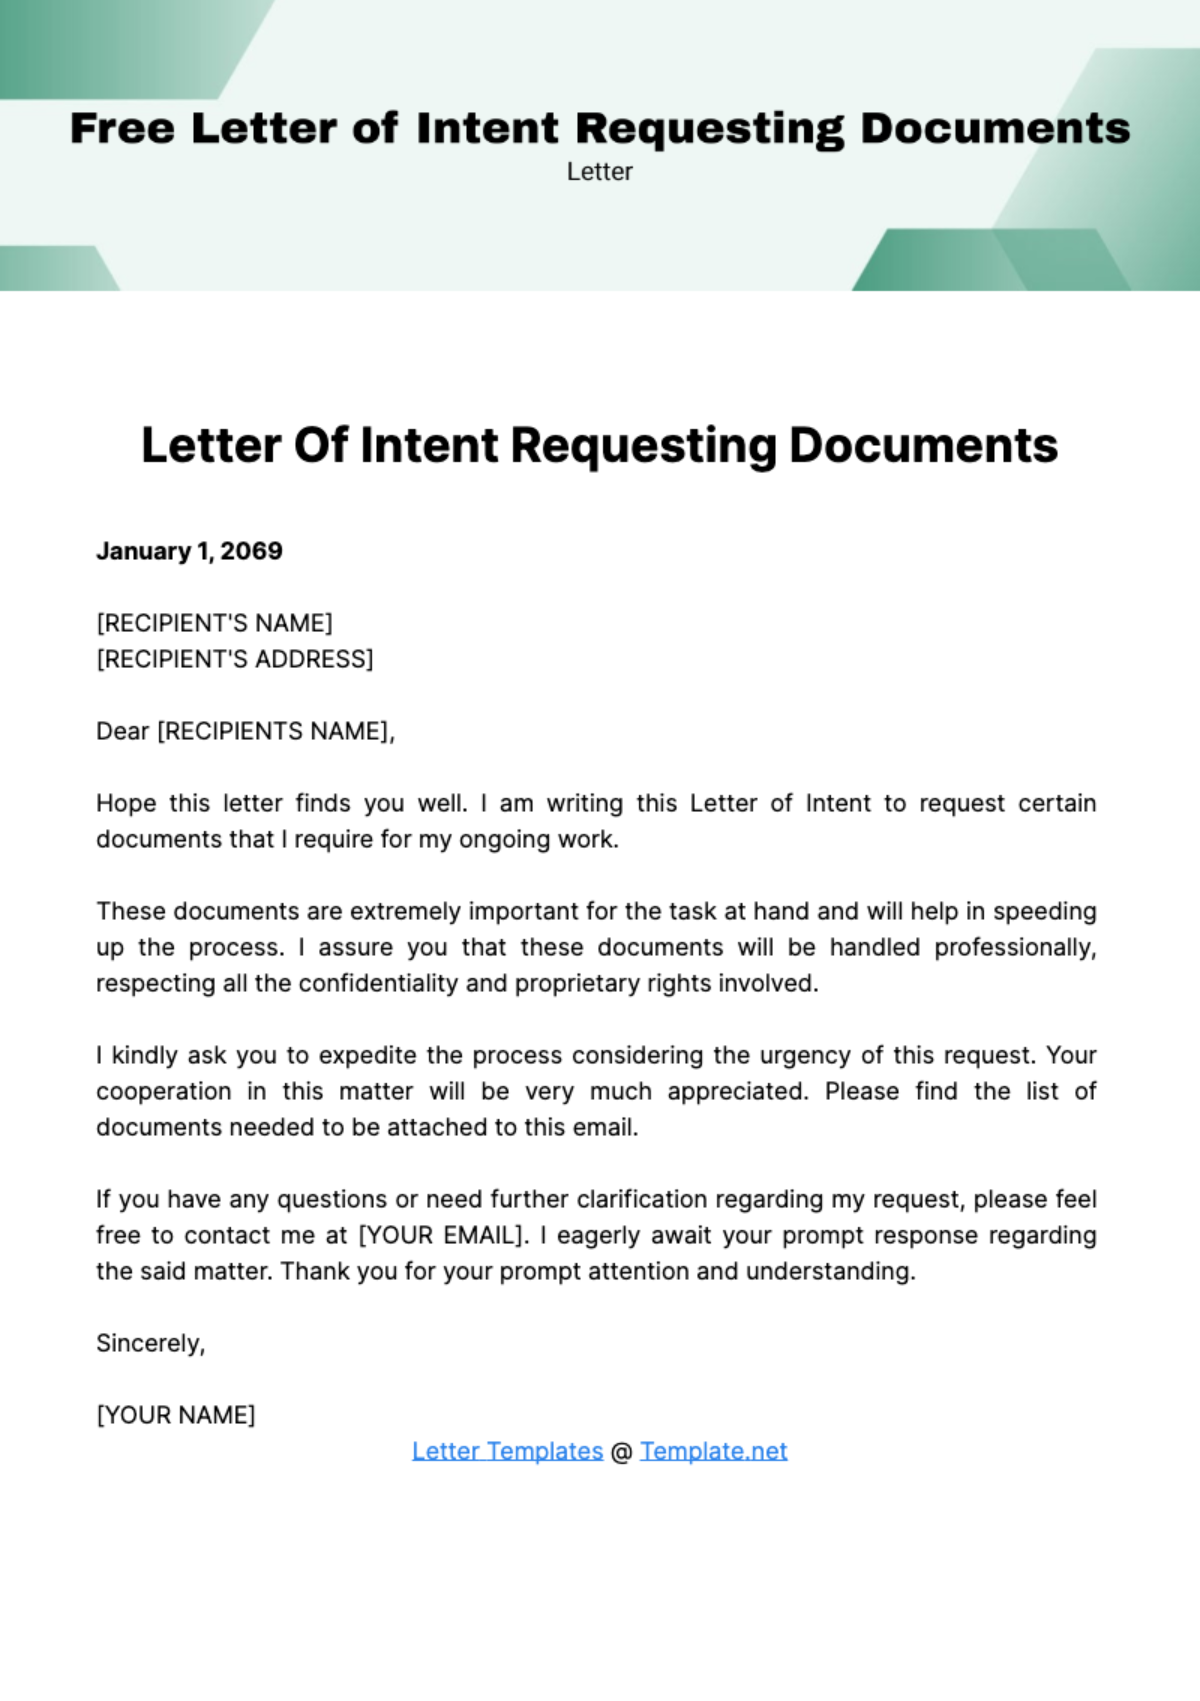 Free Letter of Intent Requesting Documents Template